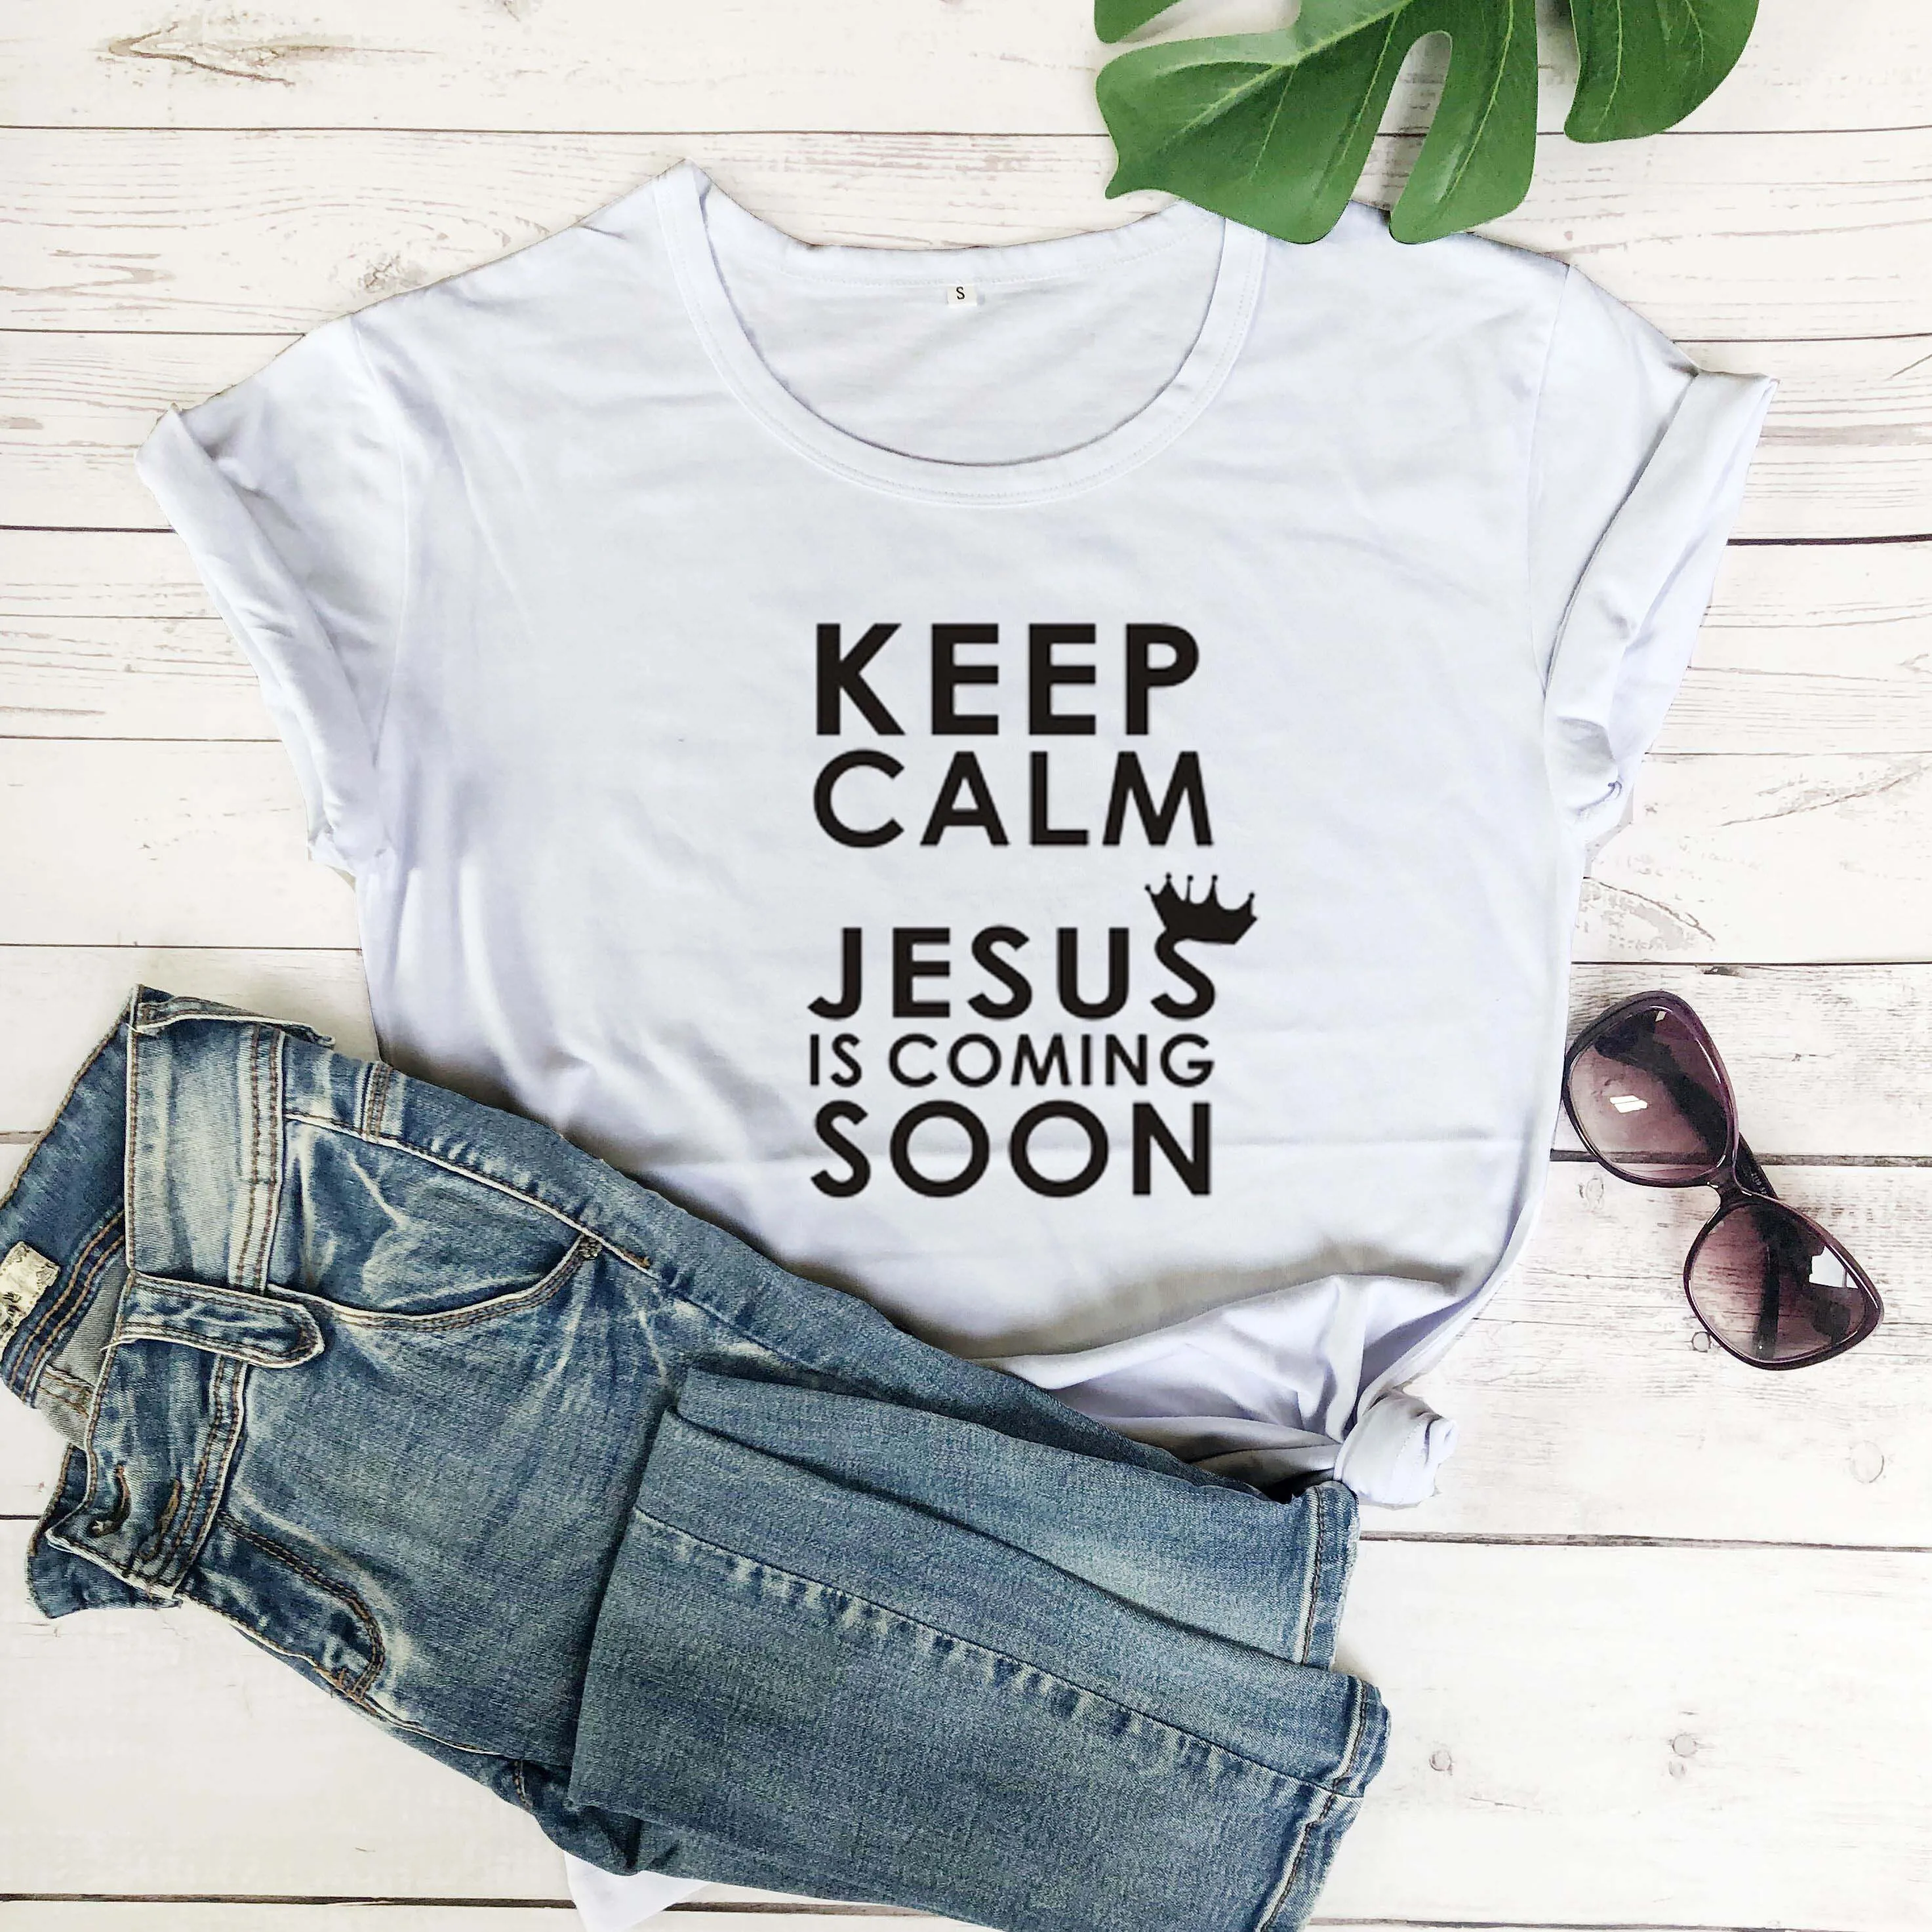 

Keep clam jesus is coming soon t shirt religion Christian Bible baptism personality slogan quote cotton tees hipster tops P027